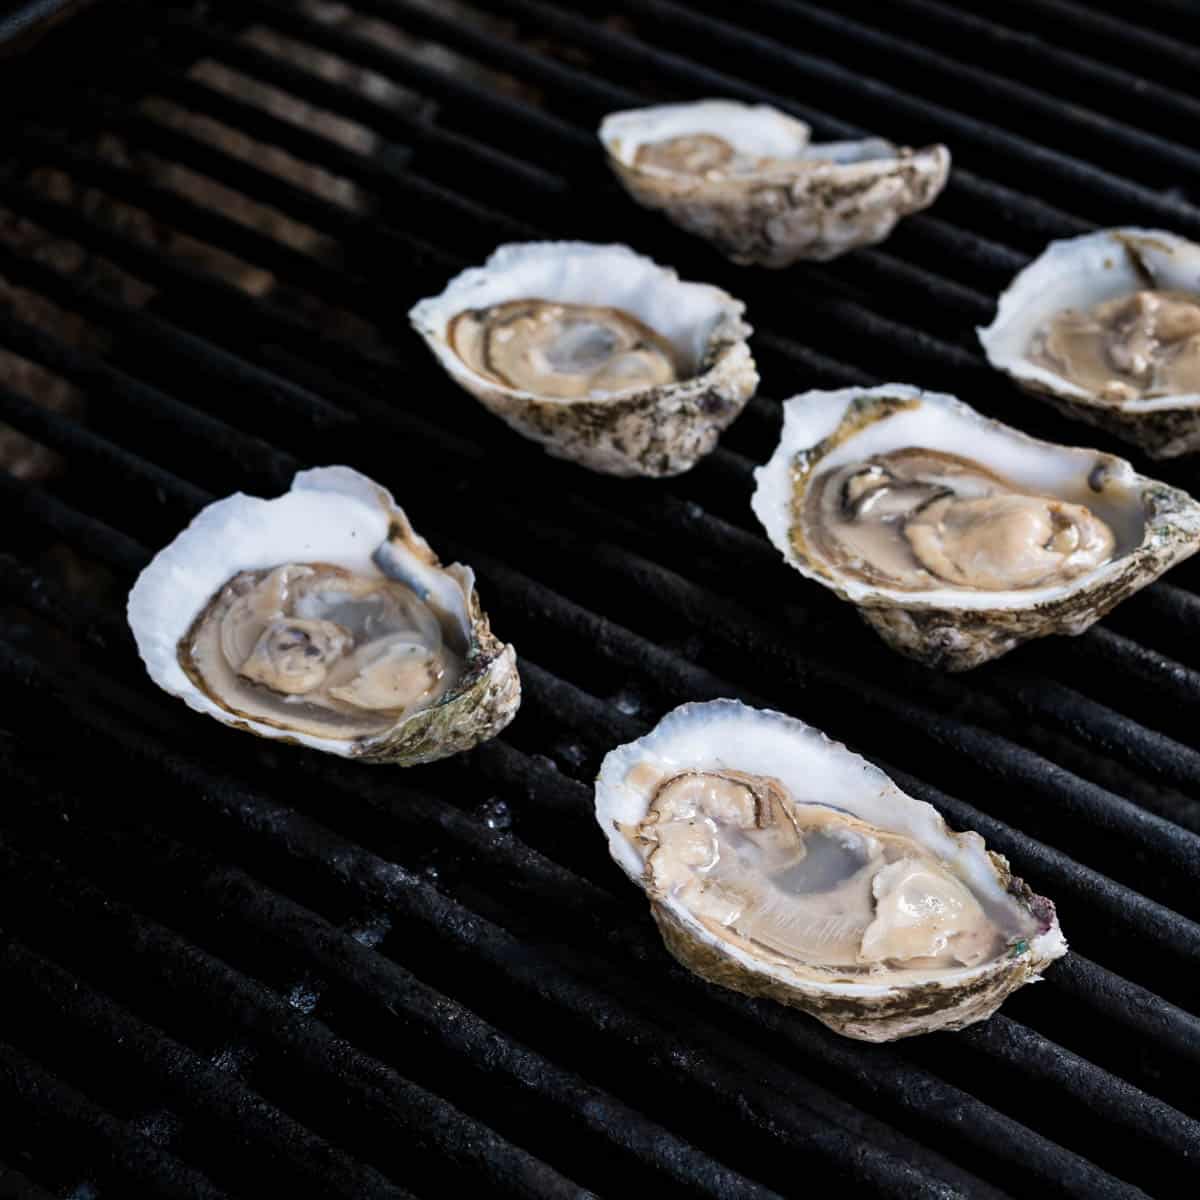 A half dozen oysters on the half shell resting on the hot grill grates. 